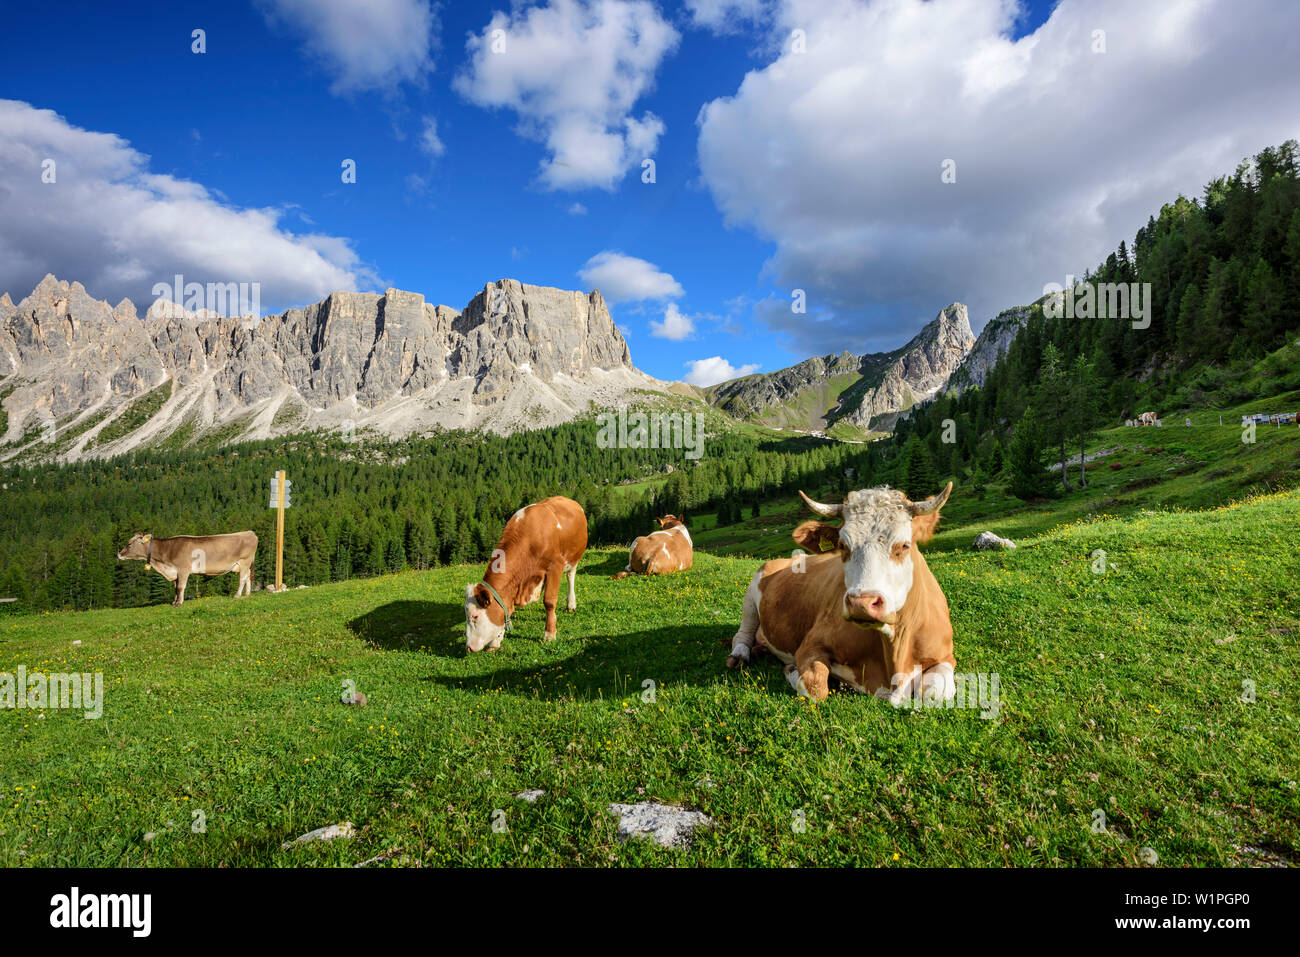 Cattle standing and laying on meadow in front of rock faces, Monte Formin in background, Dolomites, UNESCO World Heritage Site Dolomites, Venetia, Ita Stock Photo